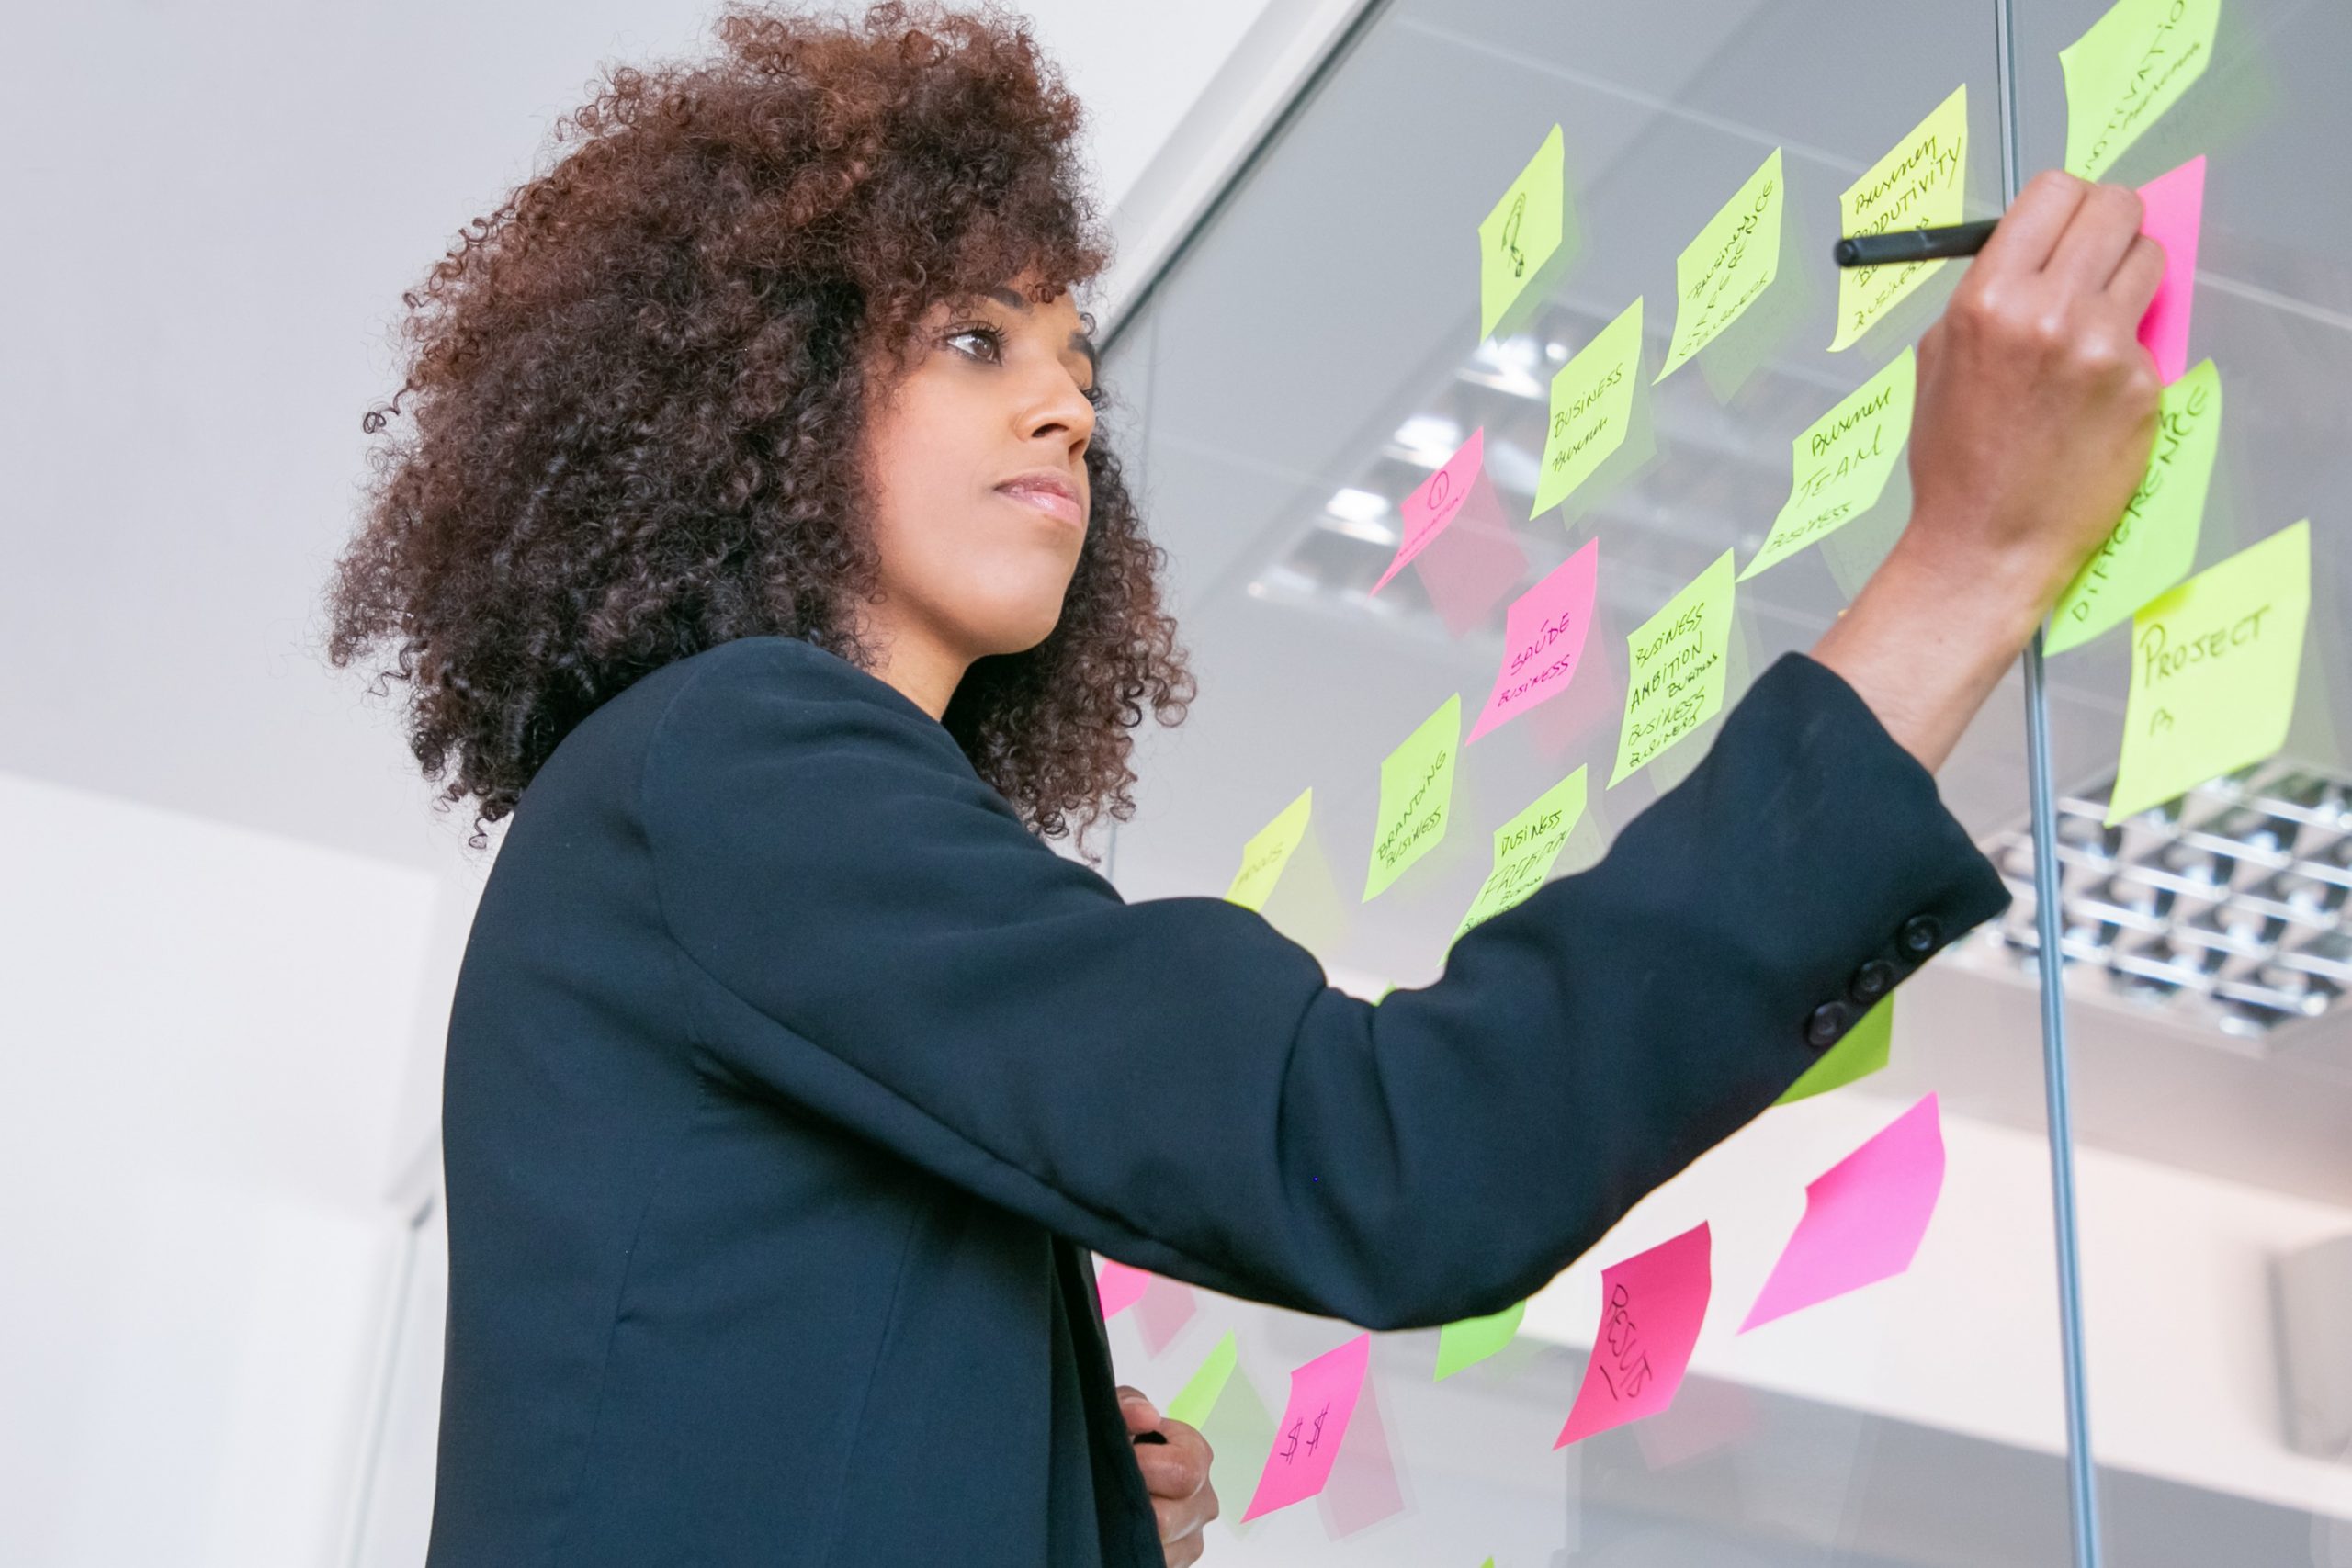 Woman writing on sticky notes on glass wall illustrates blog 